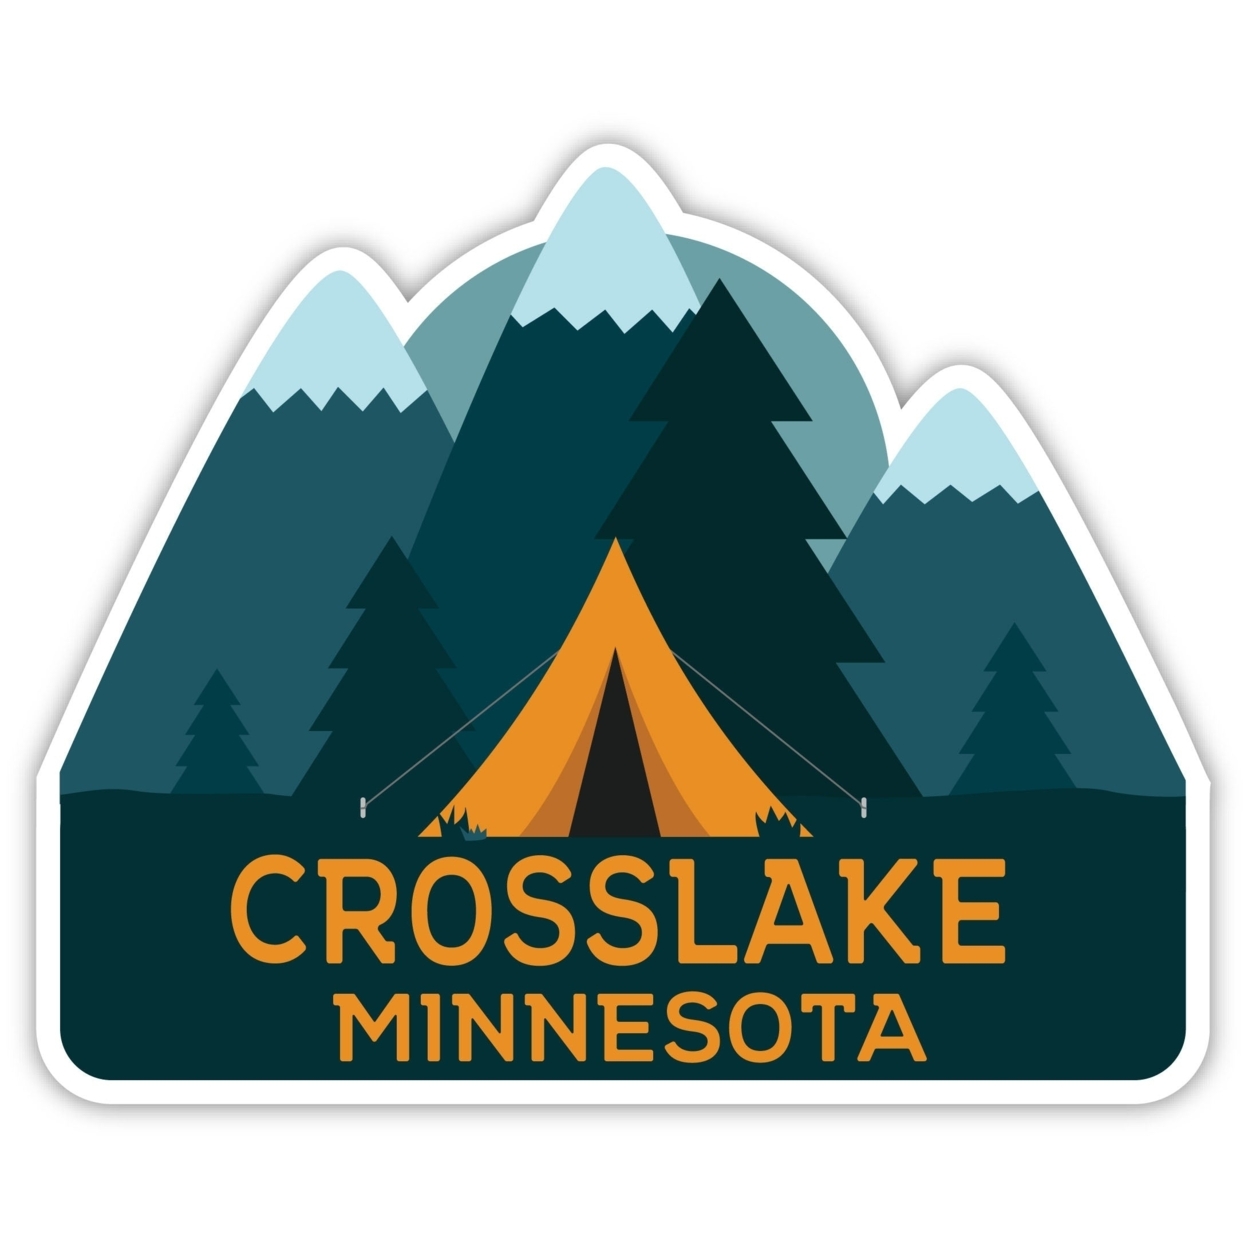 Crosslake Minnesota Souvenir Decorative Stickers (Choose Theme And Size) - 4-Pack, 4-Inch, Tent